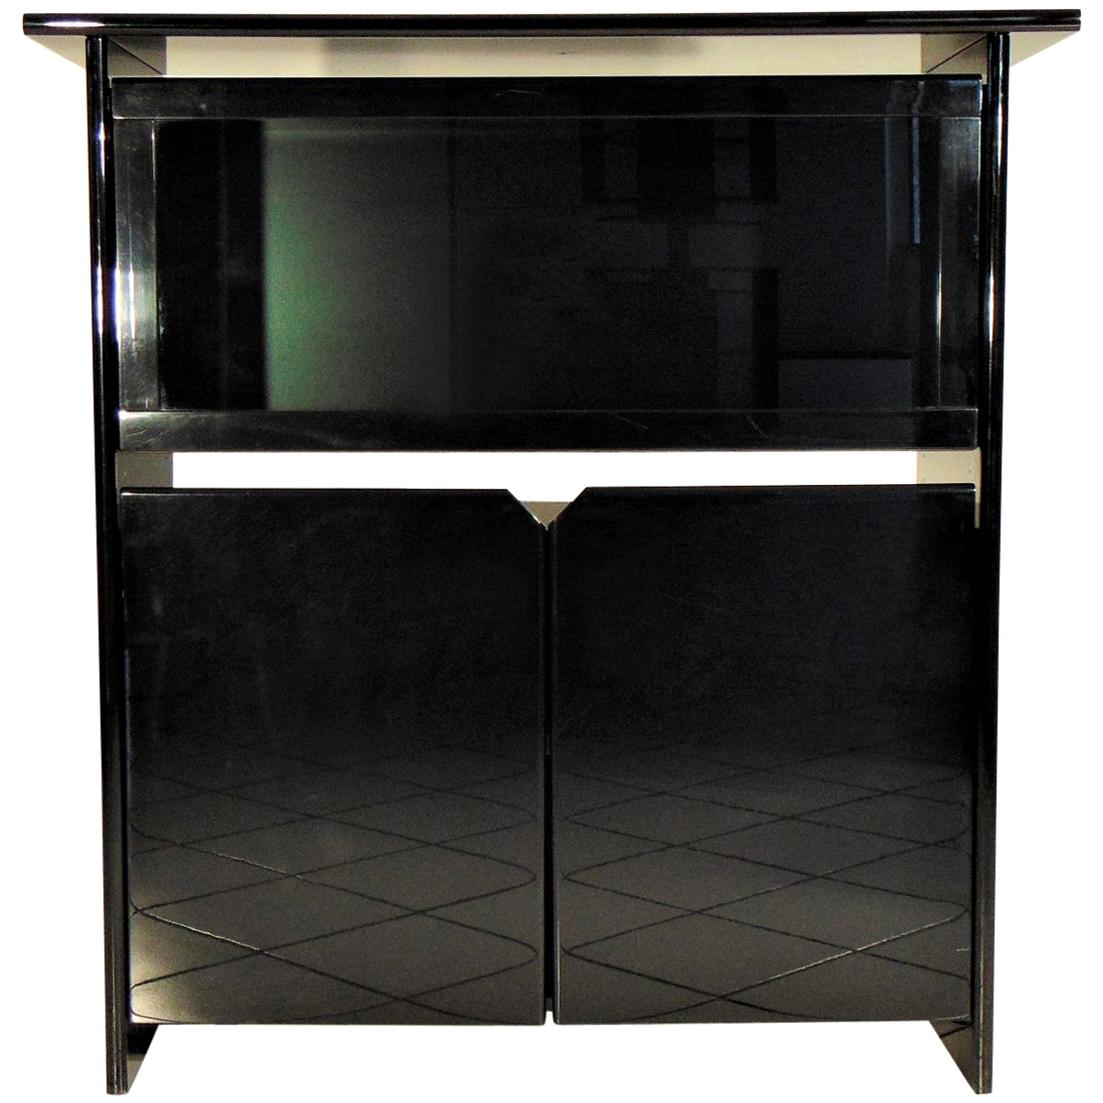 Highboard with Vitrine, Glossy Black Lacquer by Sormani, Italy, 1985